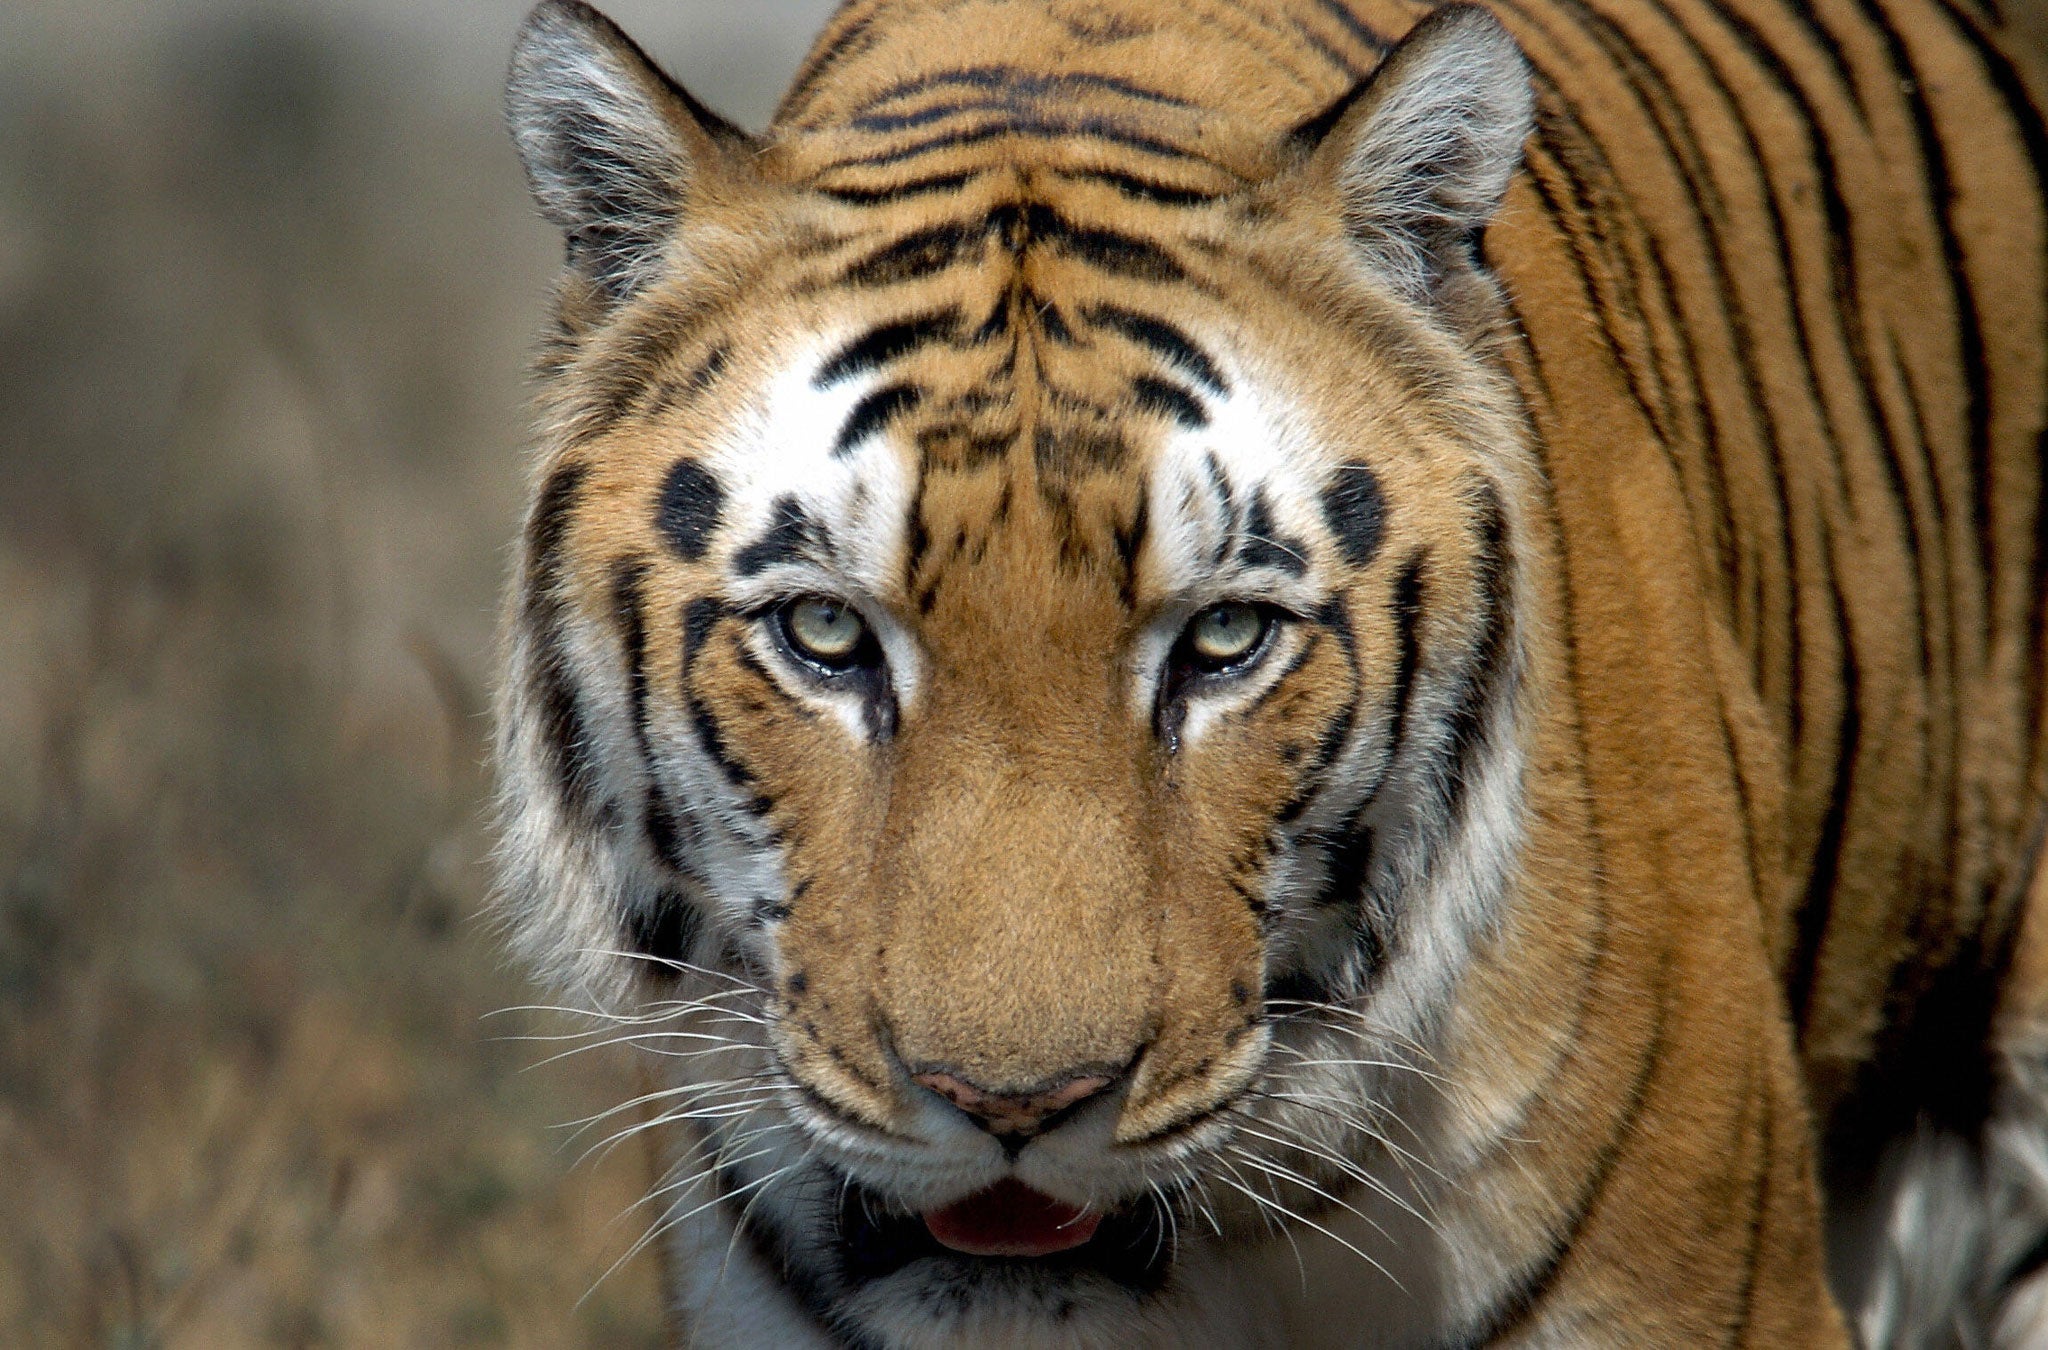 An Indian Bengal Tiger (Panthera tigris) walks in its enclosure at the Zoological park in New Delhi, 28 January 2006